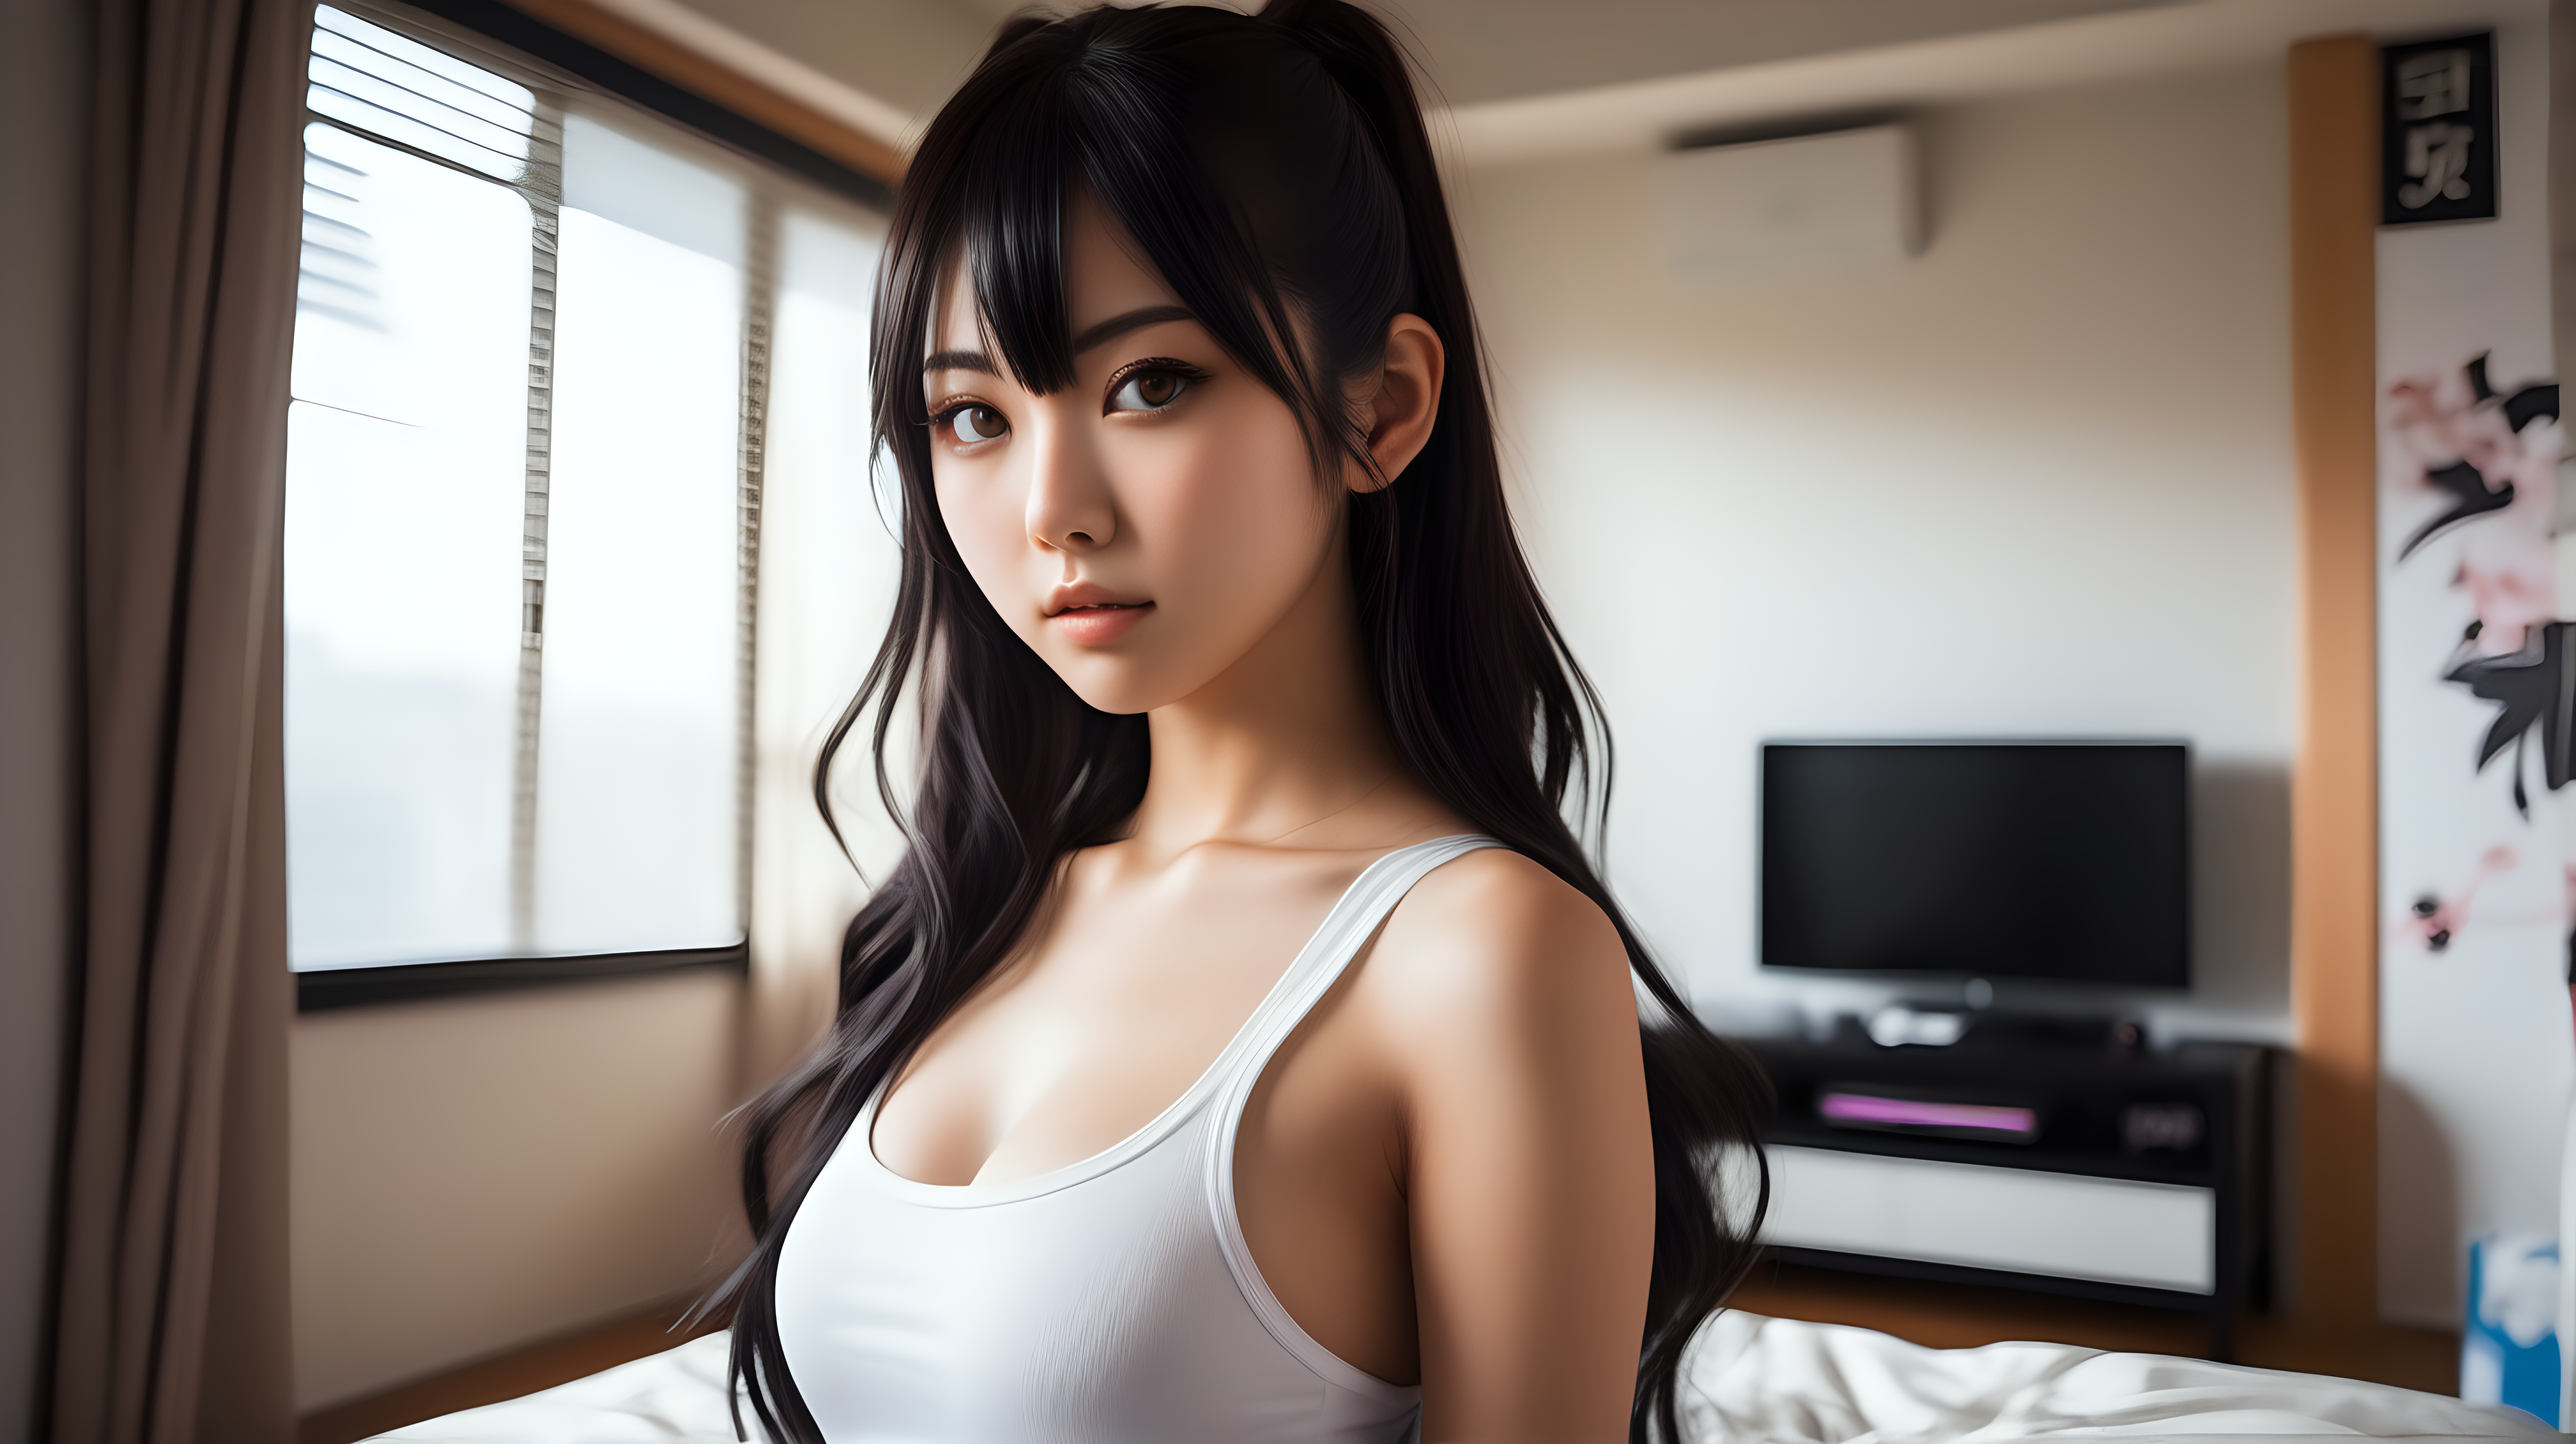 A 25yearold Japanese woman enjoys a delightful afternoon